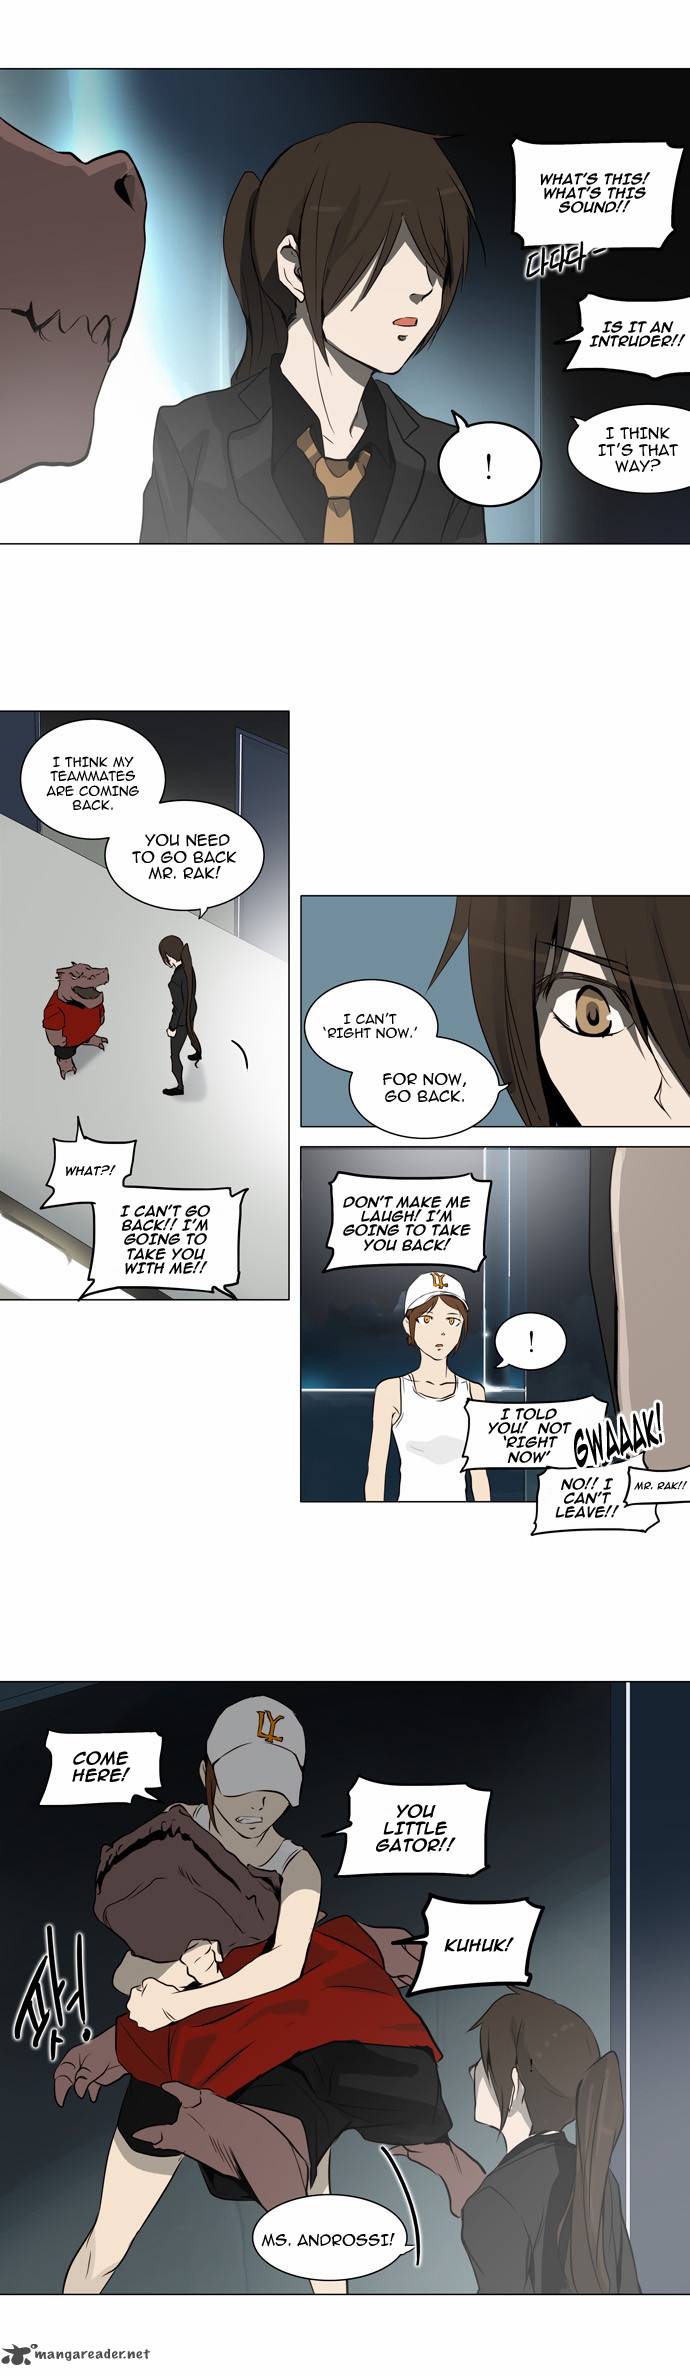 Tower Of God 160 54